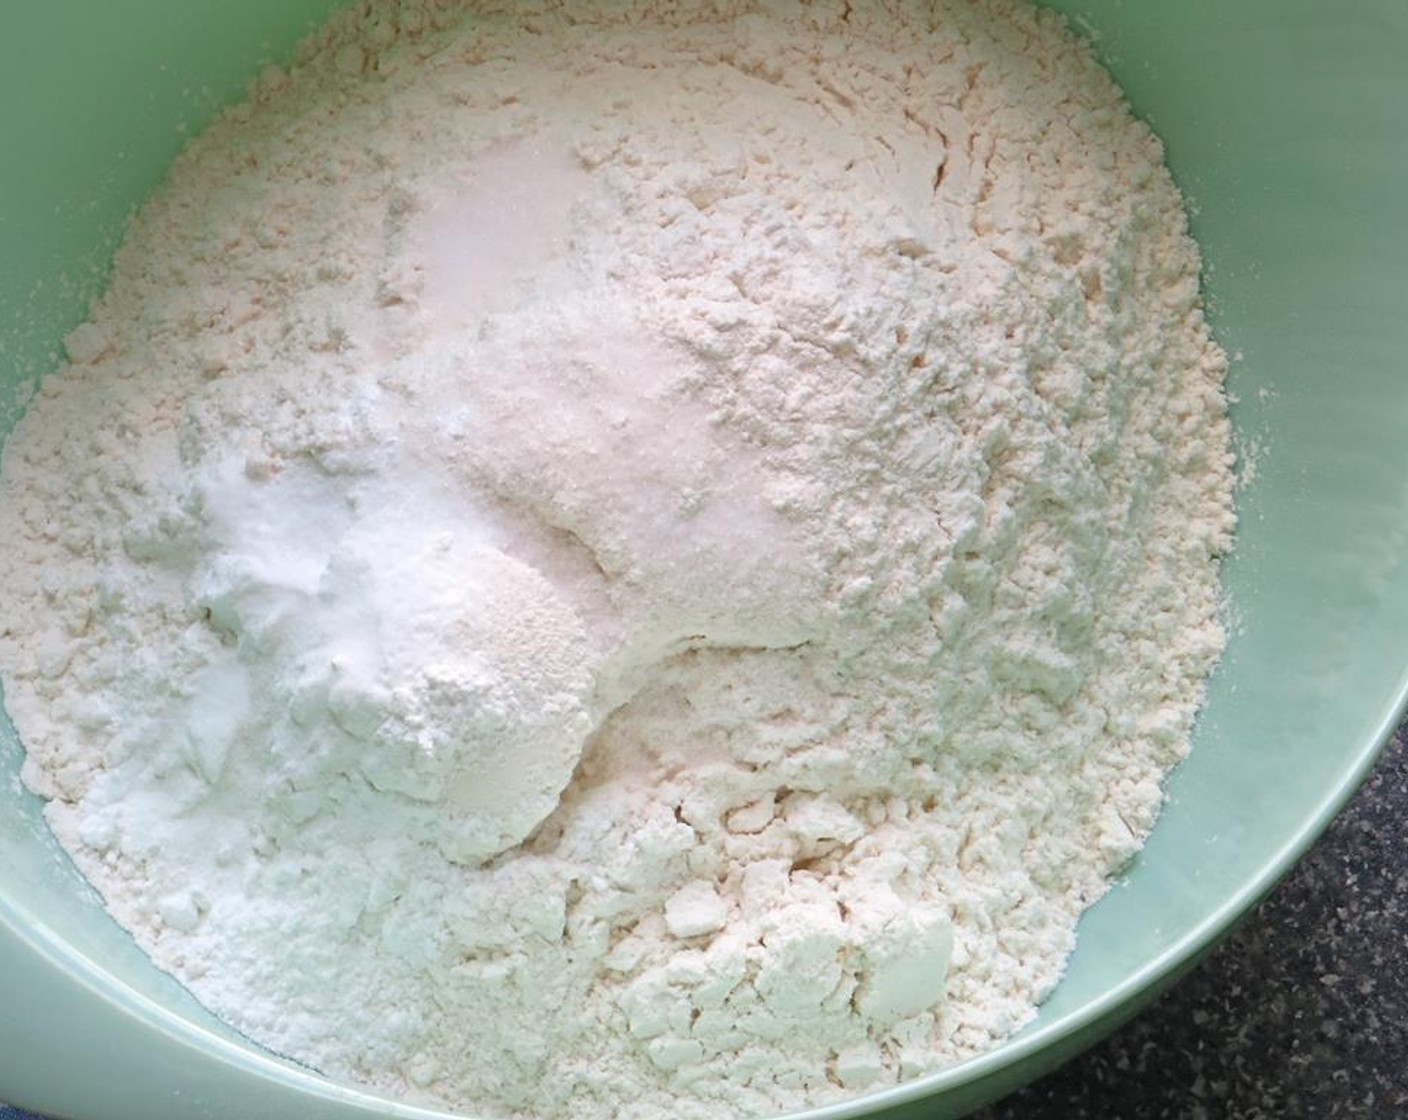 step 6 Combine Cake Flour (5 cups), Granulated Sugar (1/2 cup), Baking Powder (1/2 Tbsp), Baking Soda (1/2 tsp), and Salt (1/2 tsp) in a large bowl.